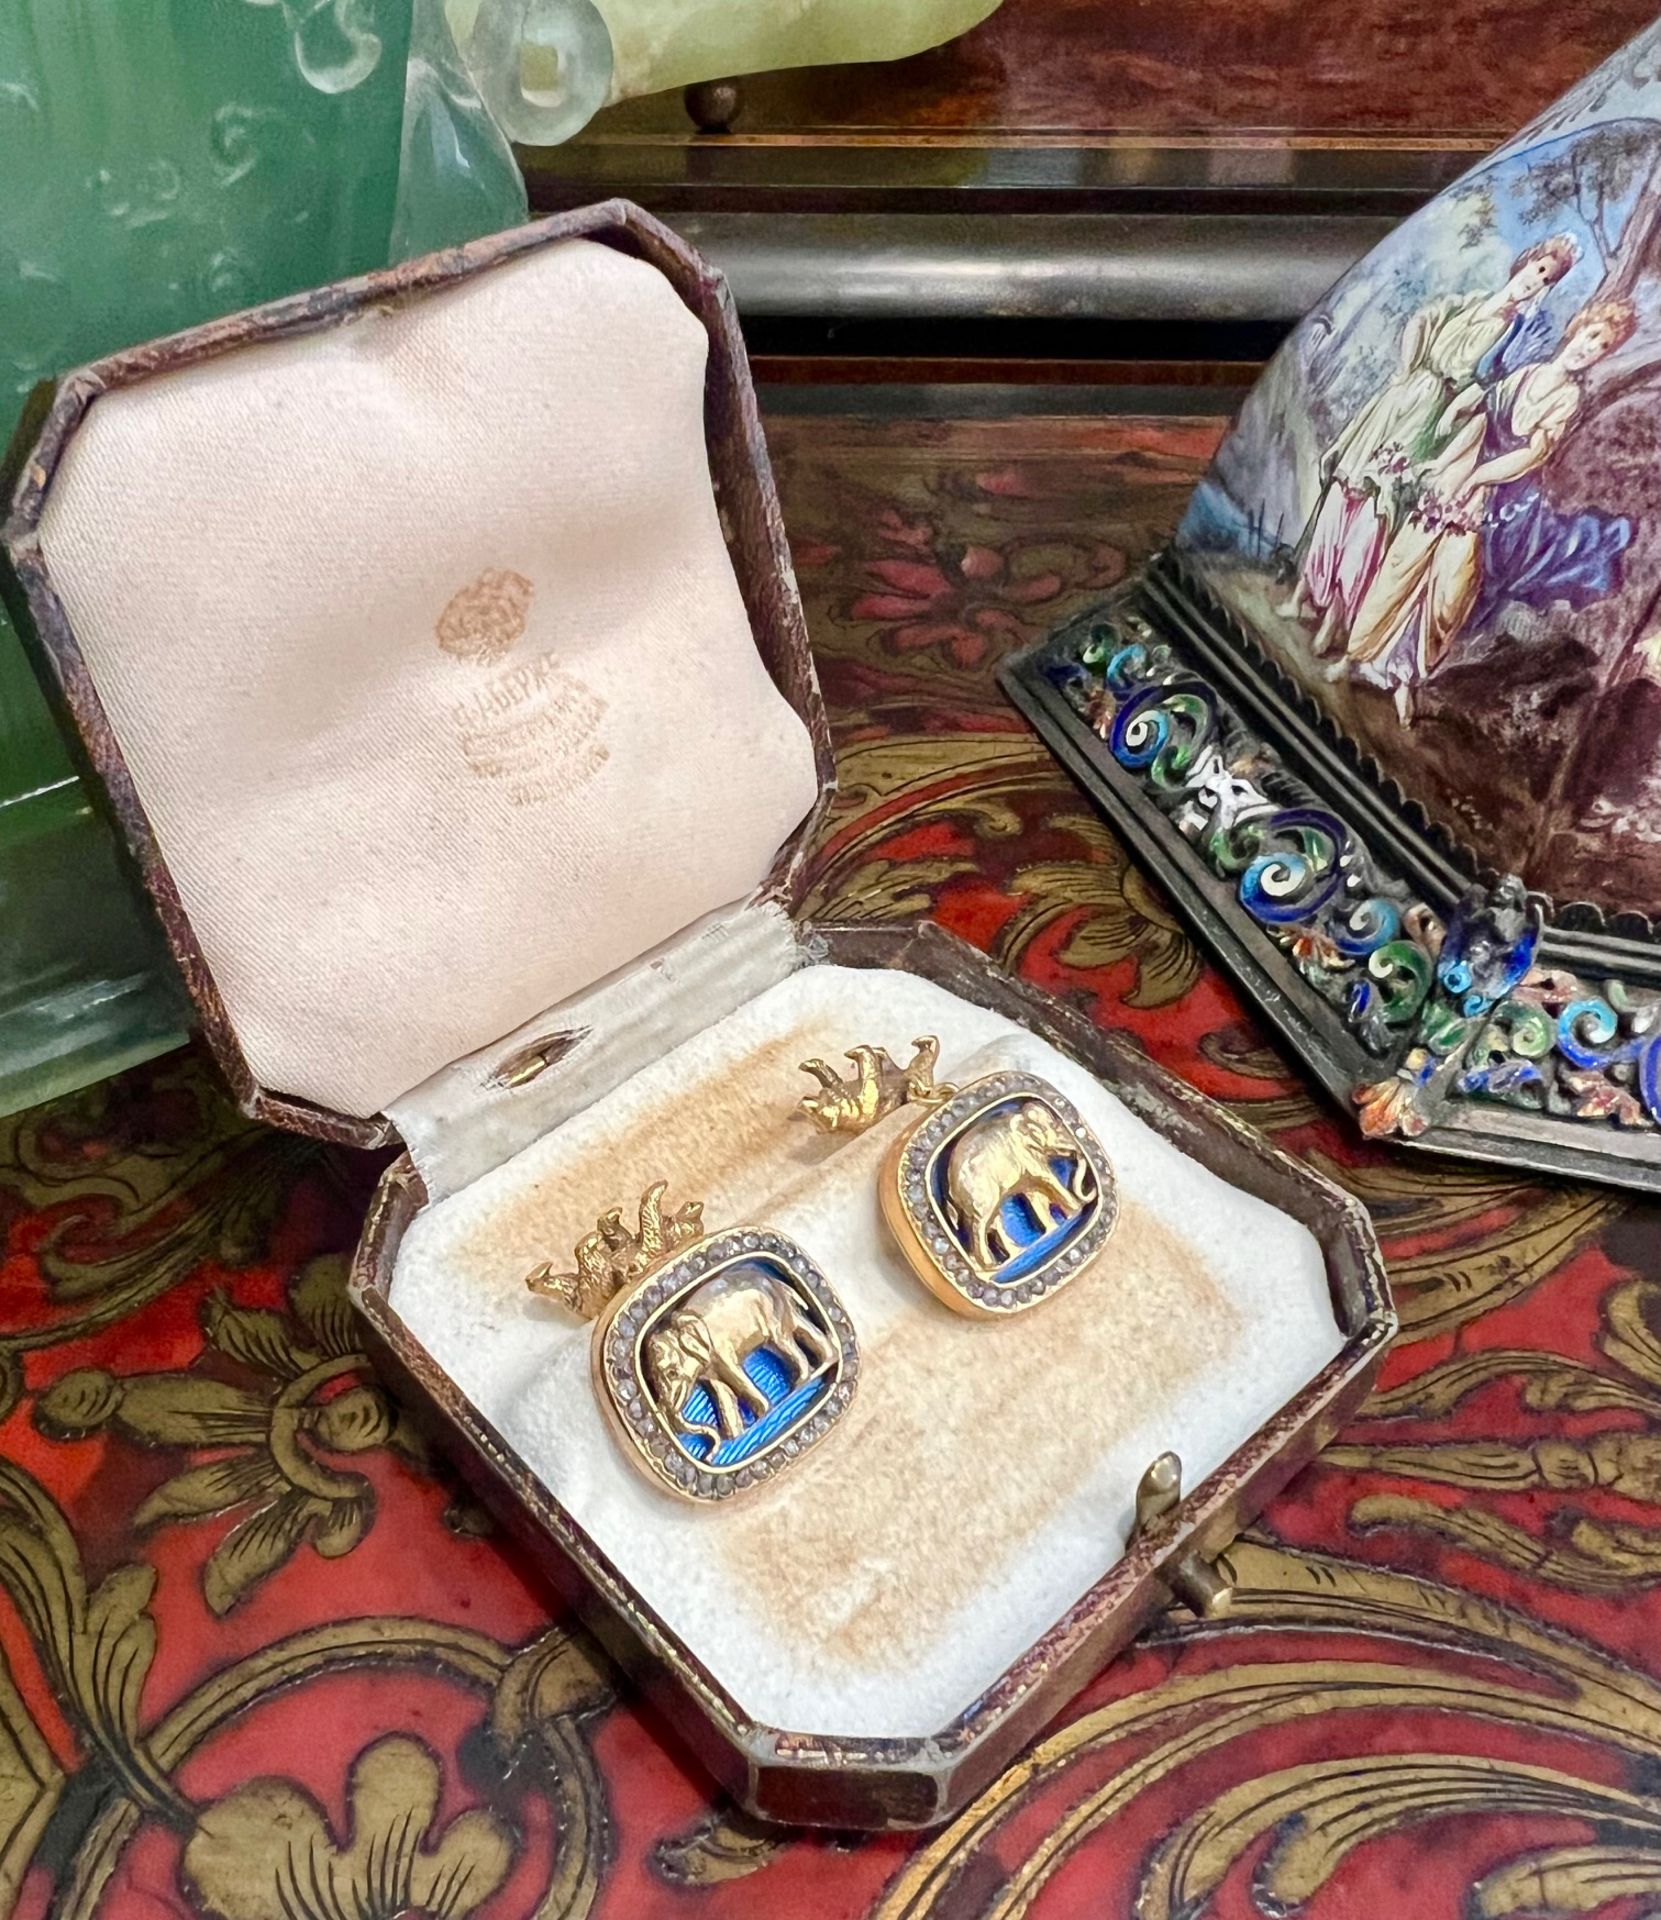 A PAIR OF FABERGE STYLE DIAMOND ENCRUSTED, SILVER GILT AND ENAMELLED CUFFLINKS - Image 12 of 13